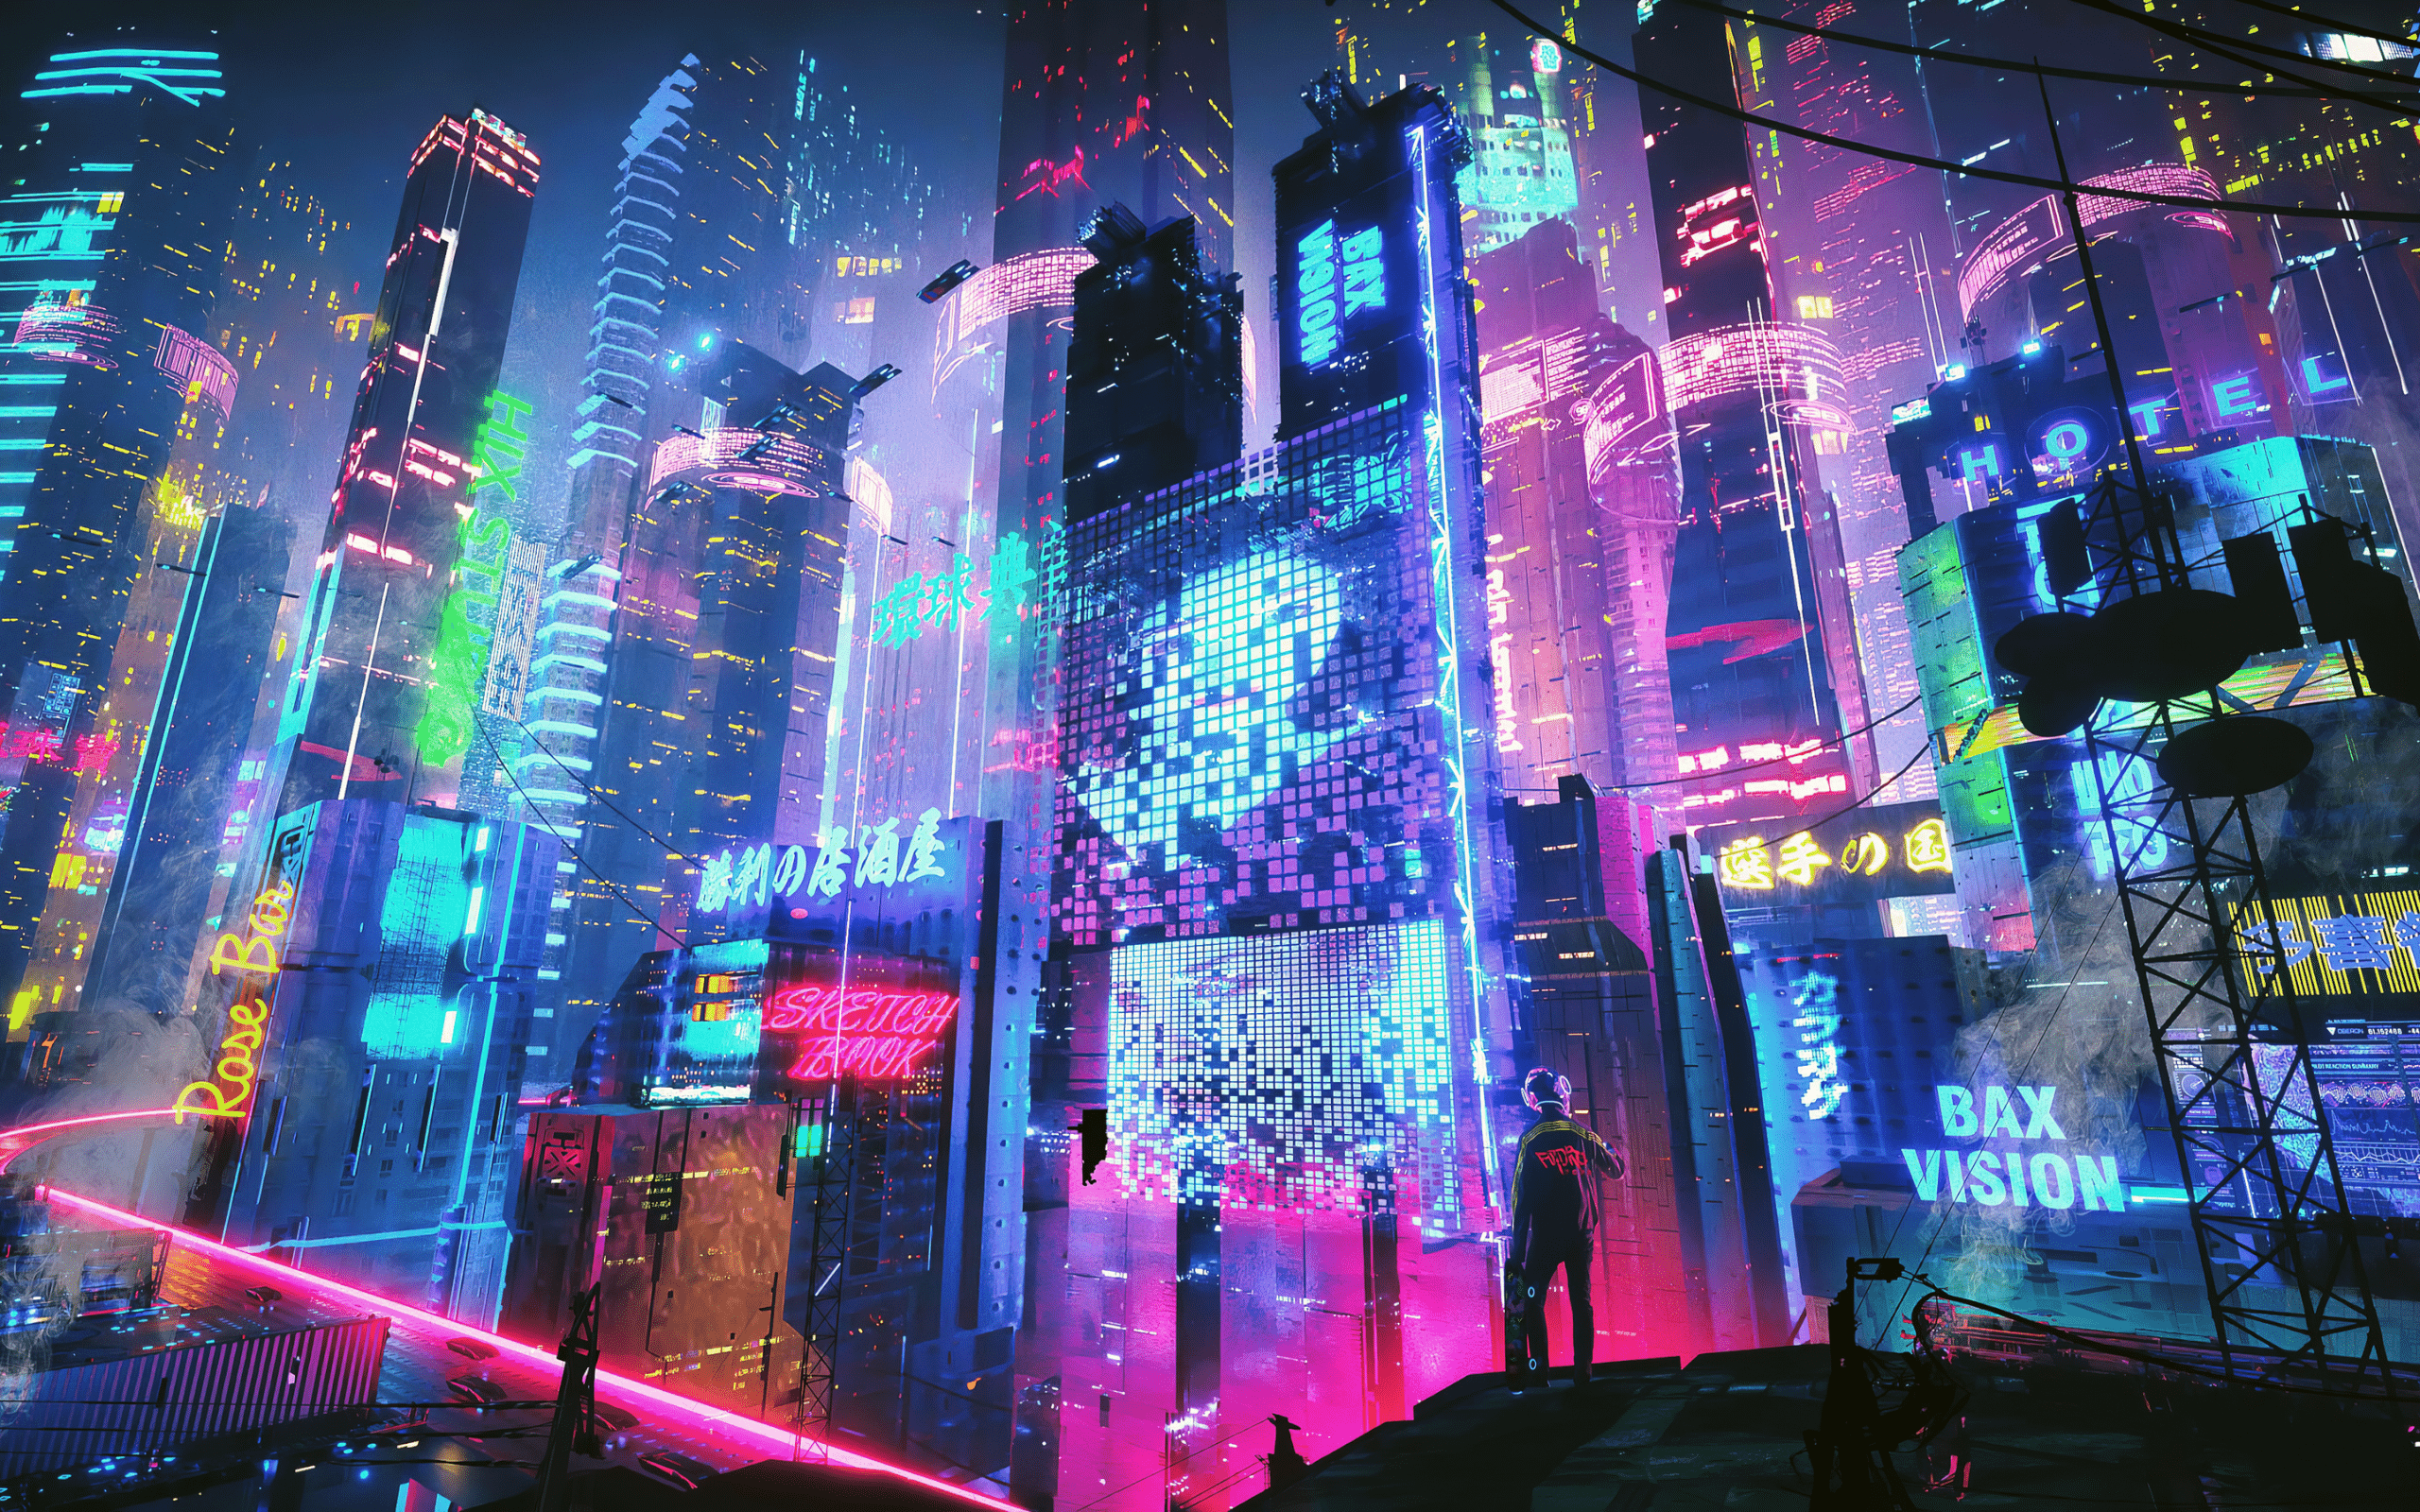 A futuristic city with neon lights and people - Cyberpunk